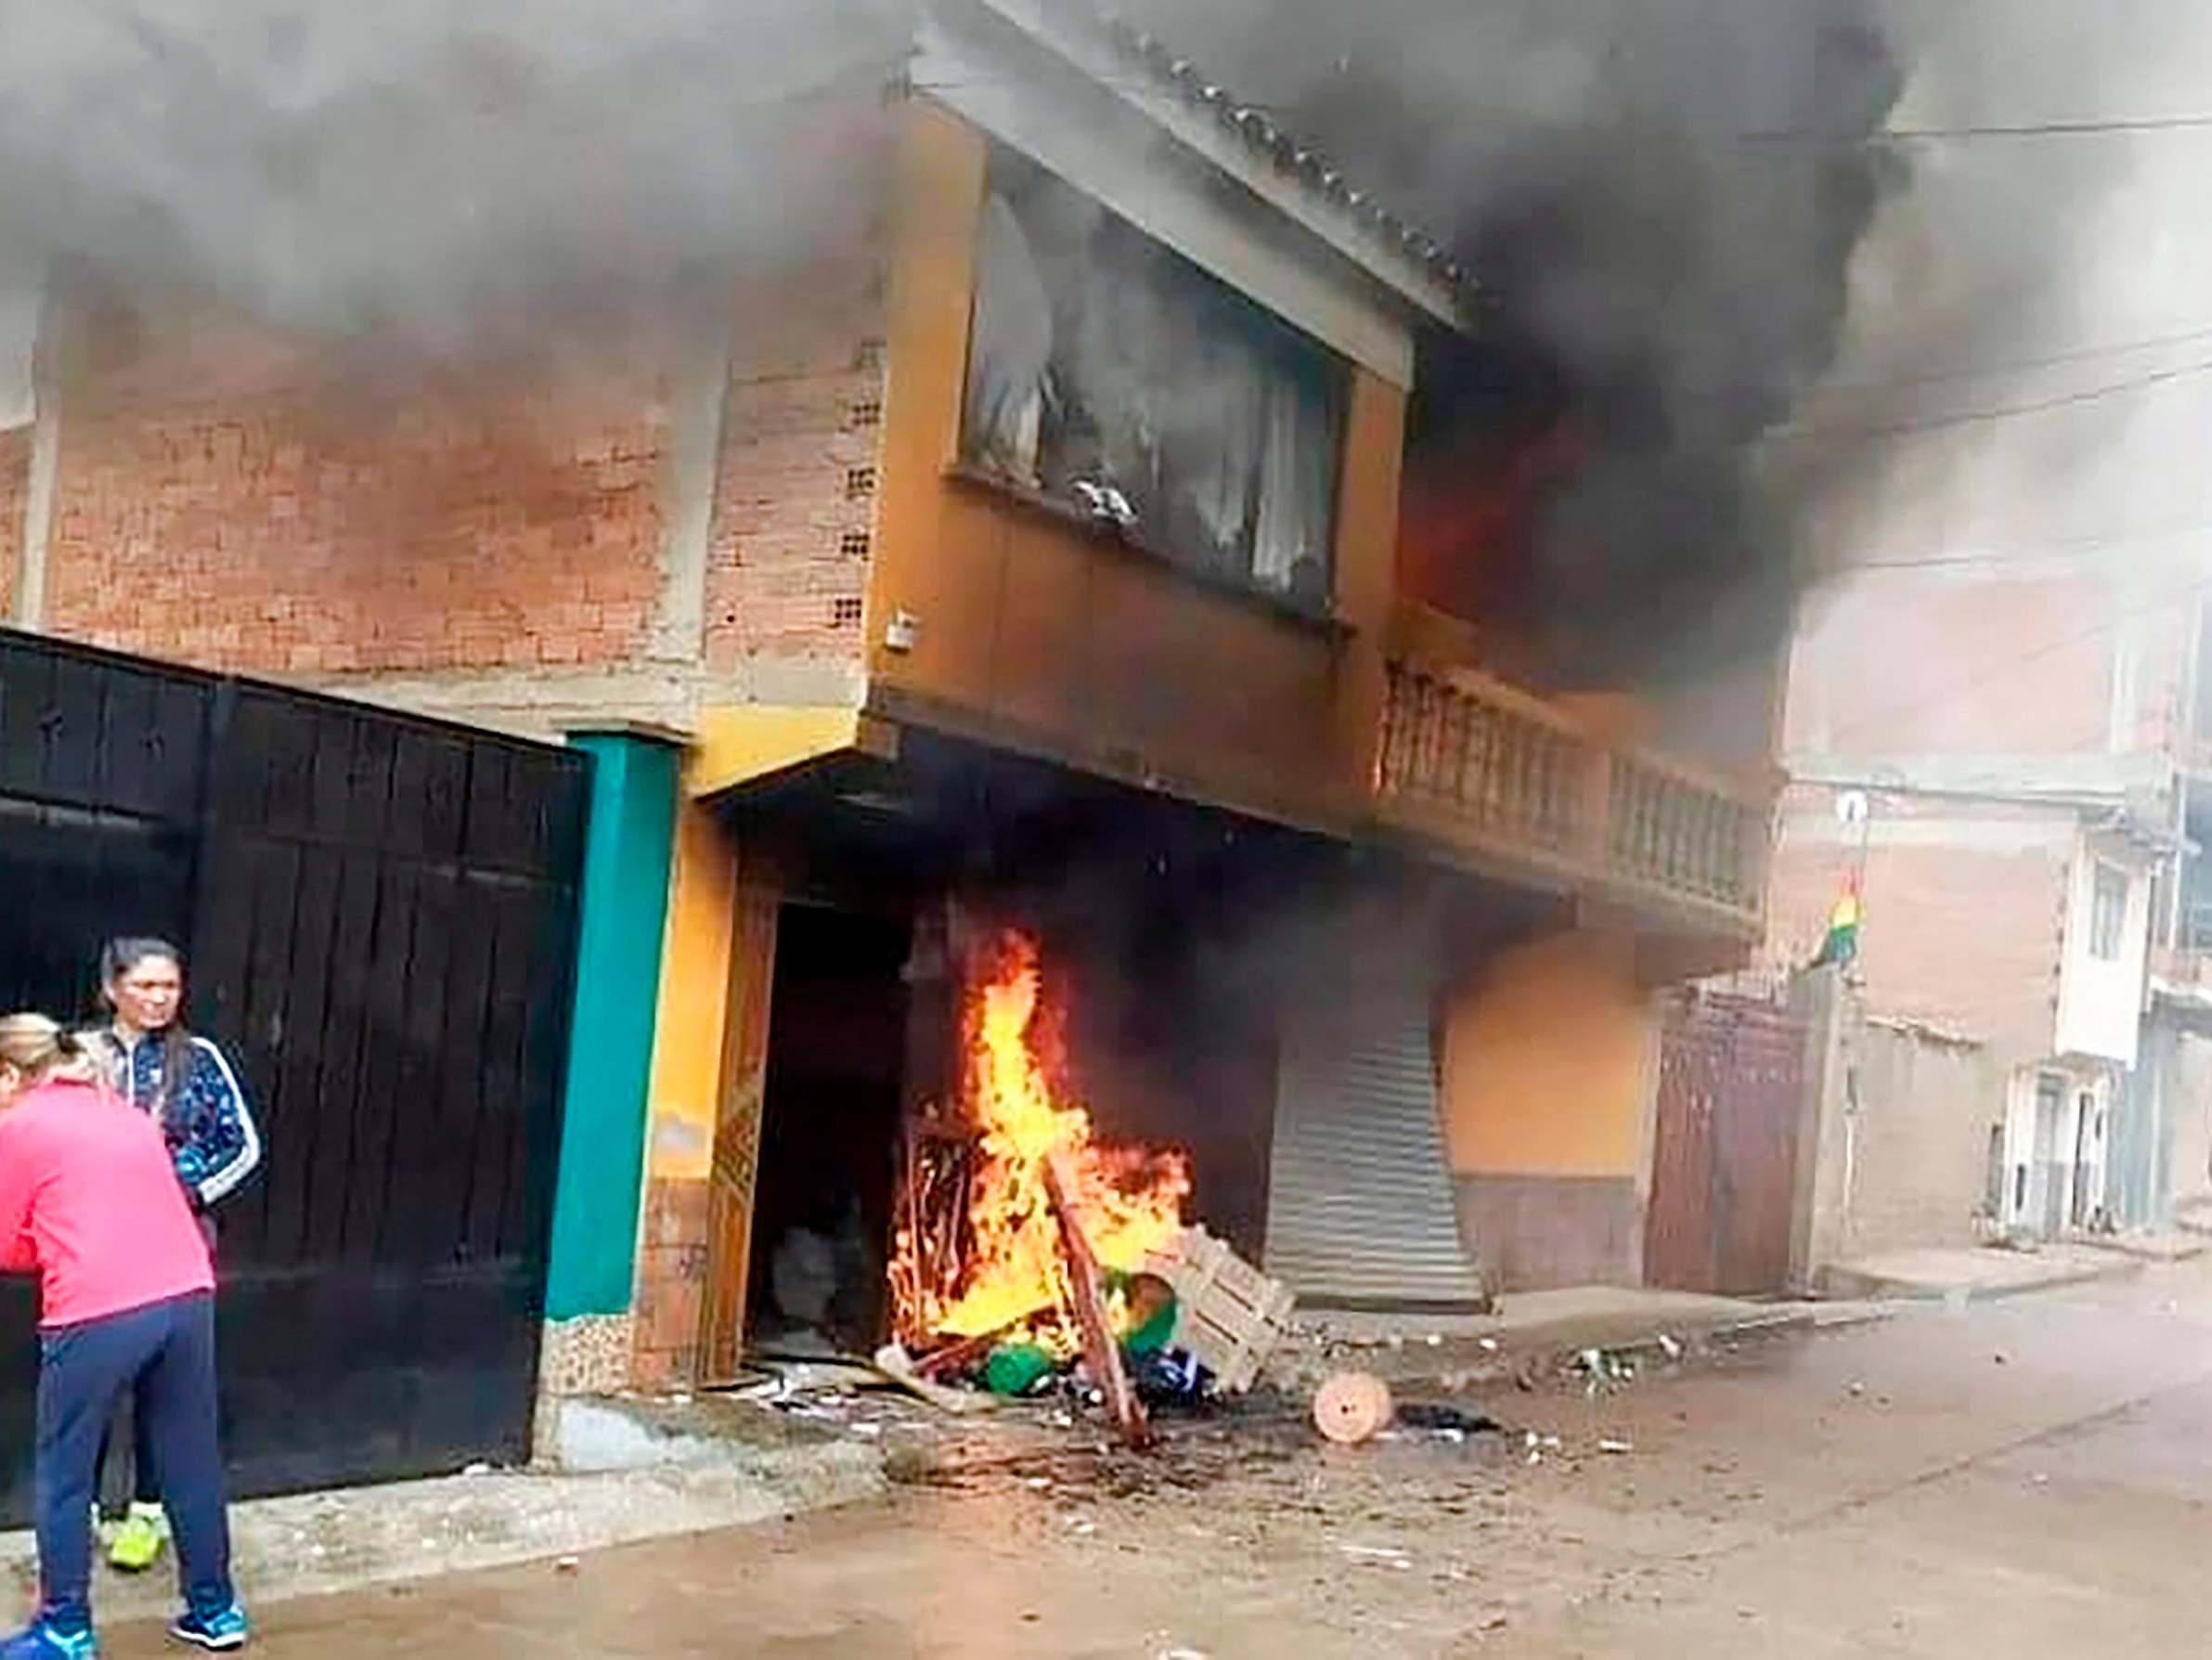 Image released by Boliva’s Presidency showing the house of Bolivia’s Ministry of Mining and Metallurgy, Cesar Navarro, burning after protesters set it on fire demanding his resignation on 10 November, 2019.